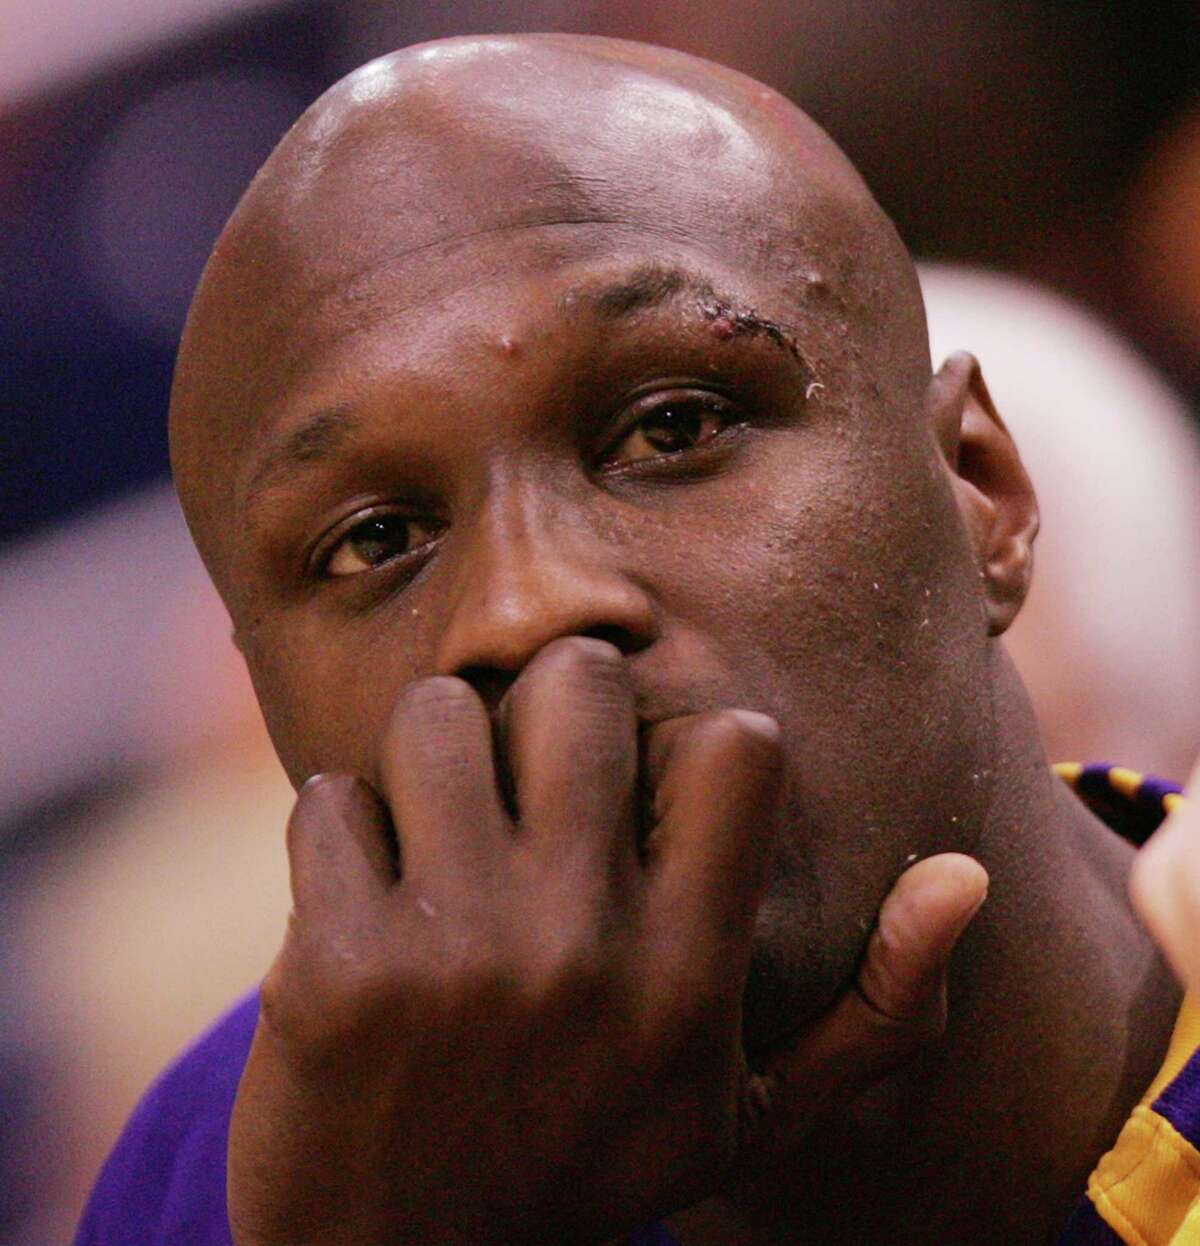 In this April 24, 2007, file photo, Los Angeles Lakers’ Lamar Odom sits on the bench in the fourth quarter of a Western Conference playoff basketball game against the Phoenix Suns in Phoenix. Odom, who was embraced by teammates and television fans alike for his Everyman approach to fame, was found face-down and alone Tuesday, Oct. 13, 2015, after spending four days at the Love Ranch, a legal Nevada brothel.